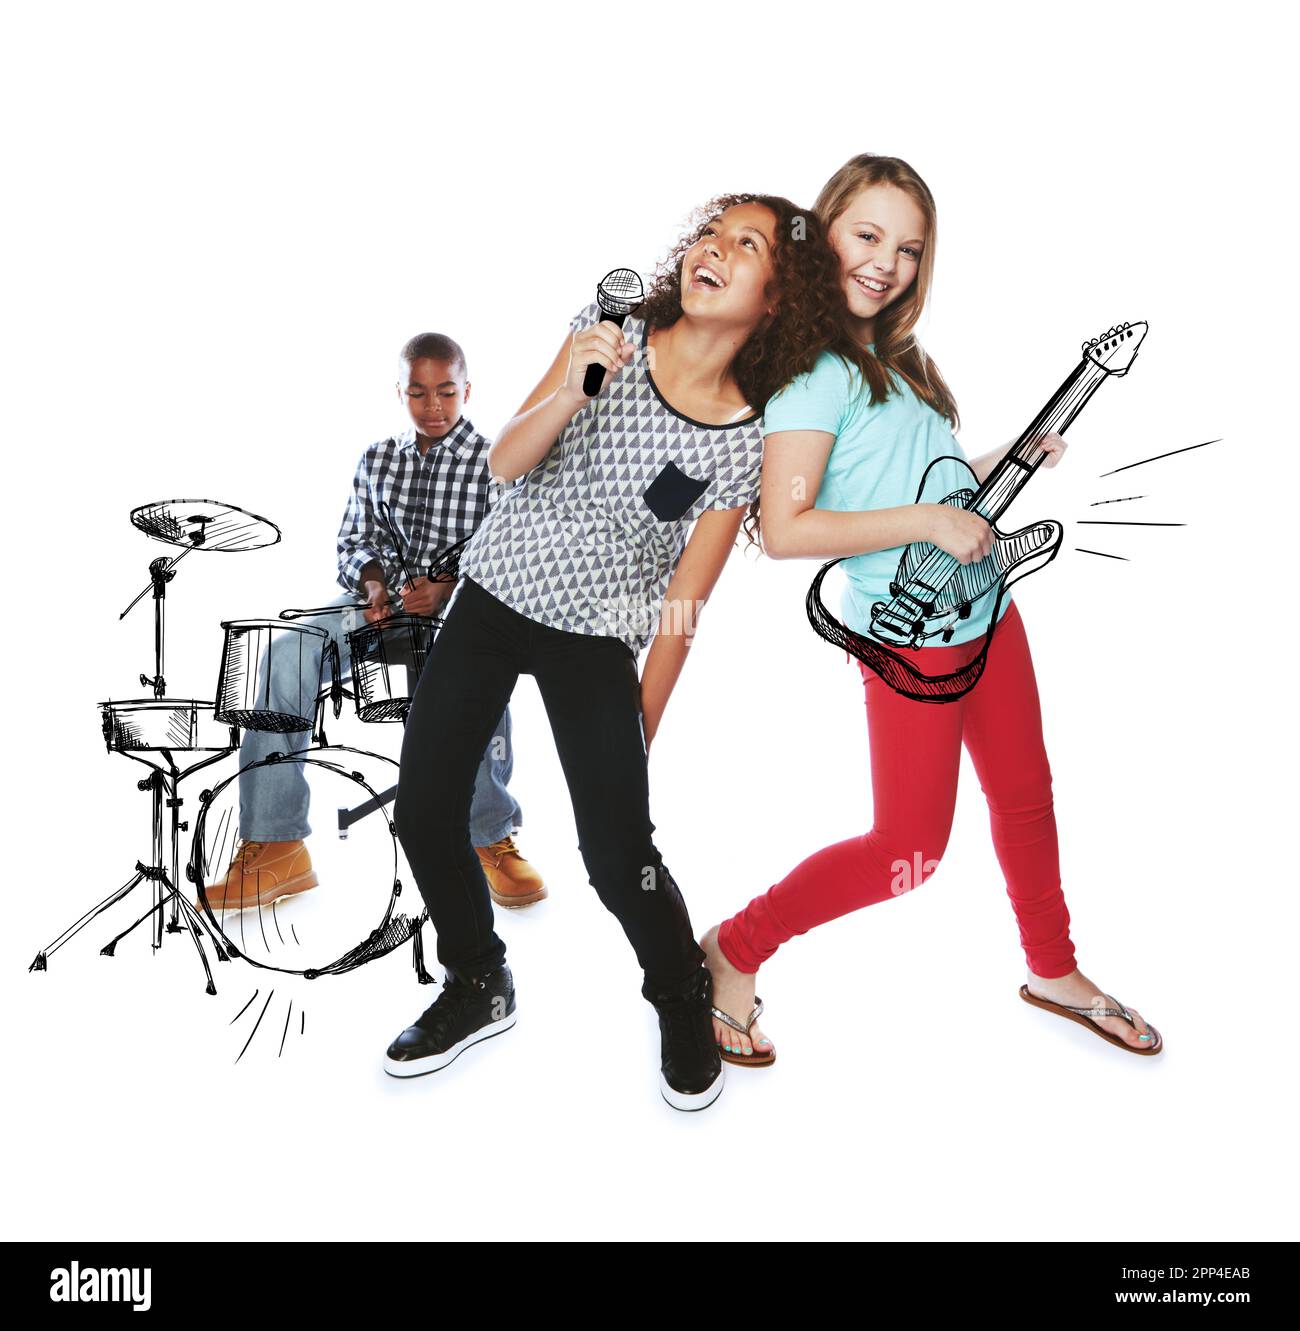 Having a great jamming session. Studio shot of children playing rock music on imaginary instruments. Stock Photo